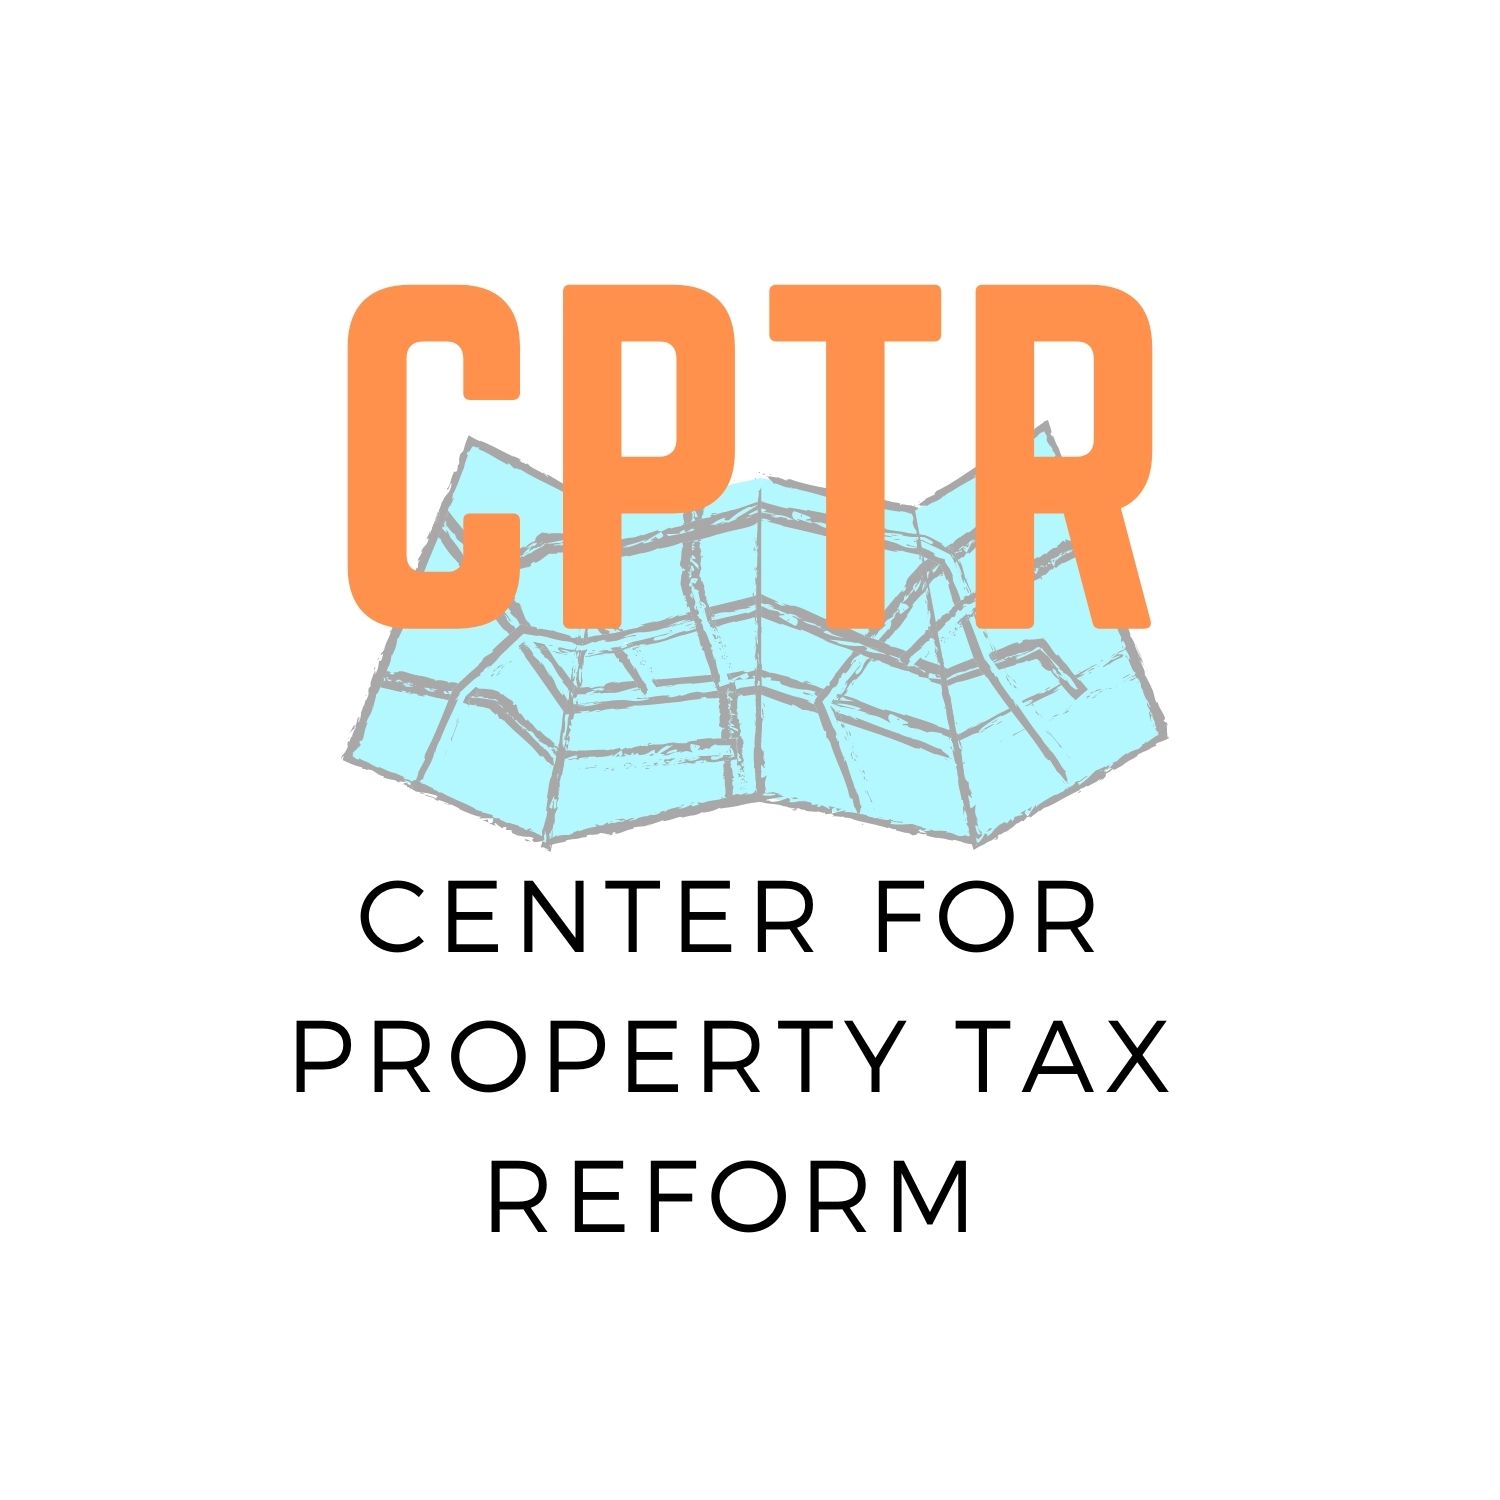 Center for Property Tax Reform